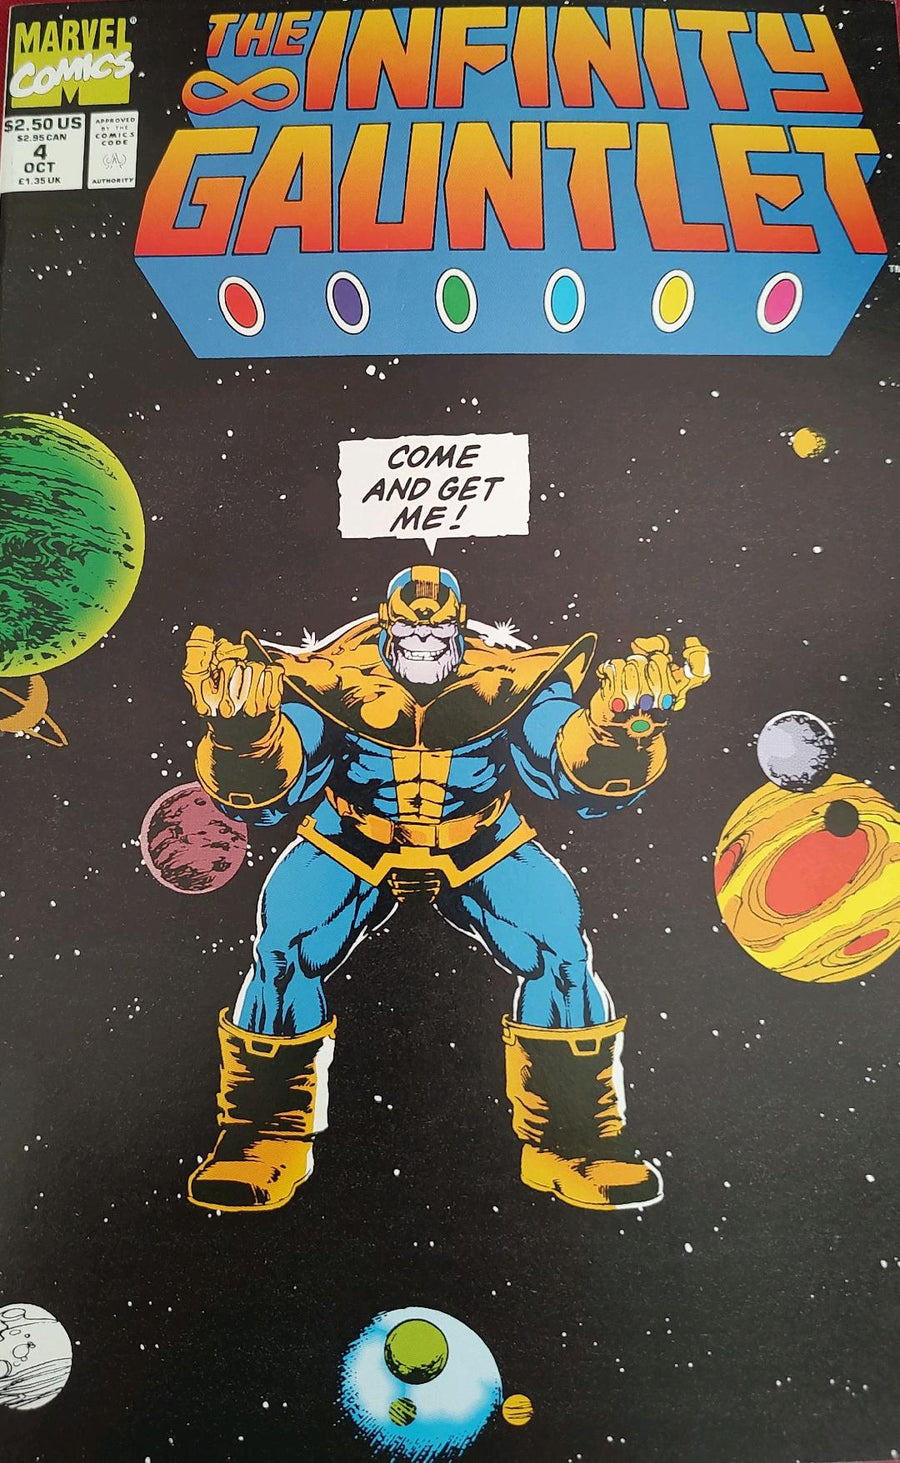 The Infinity Gauntlet #4 Comic Book Cover